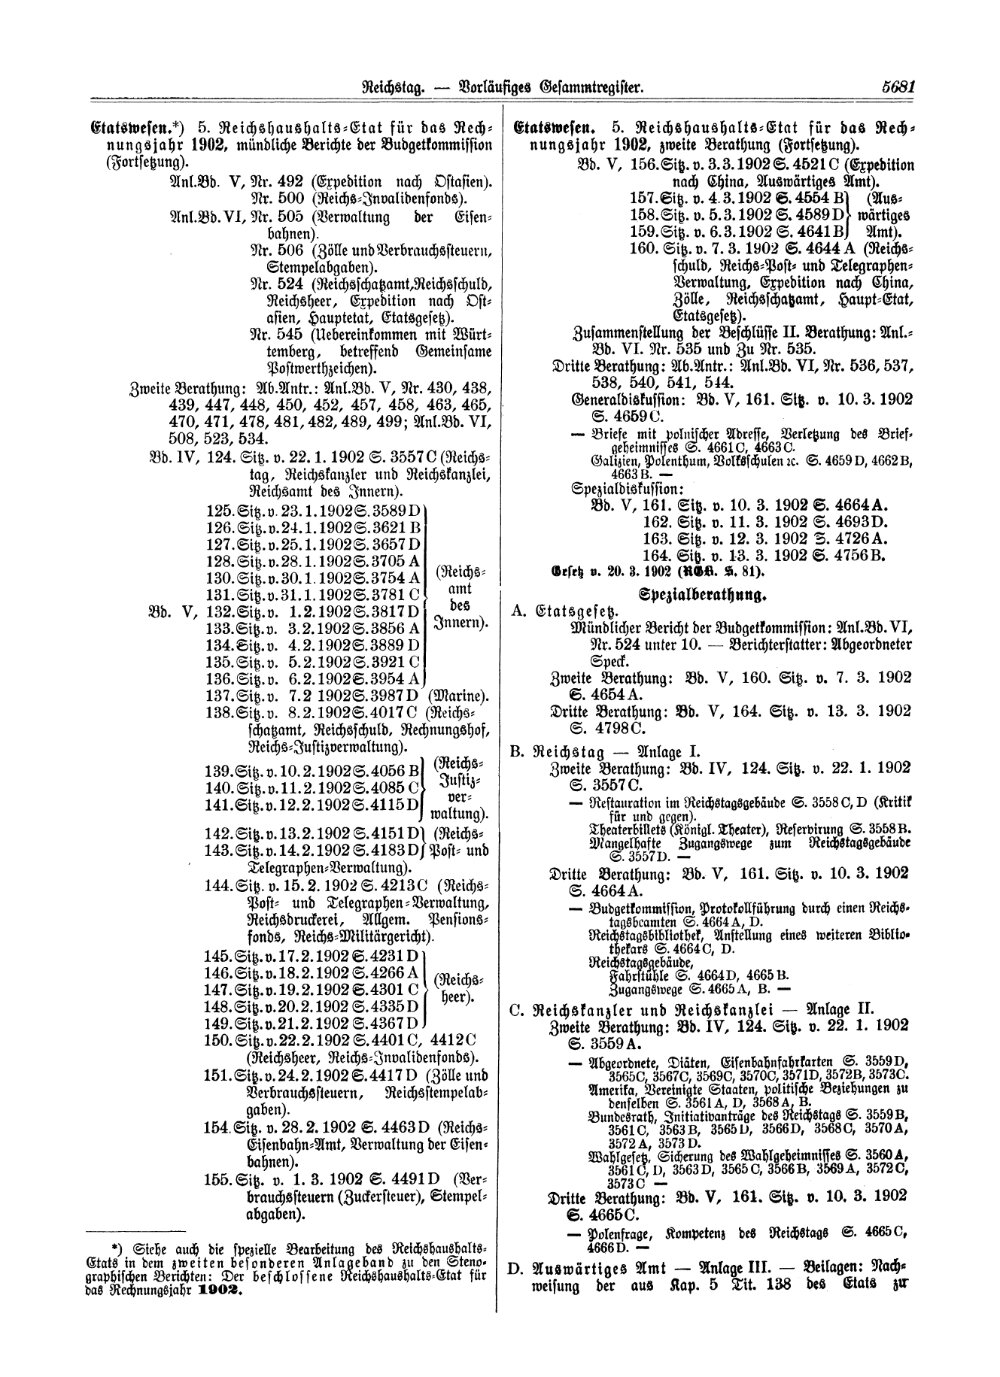 Scan of page 5681